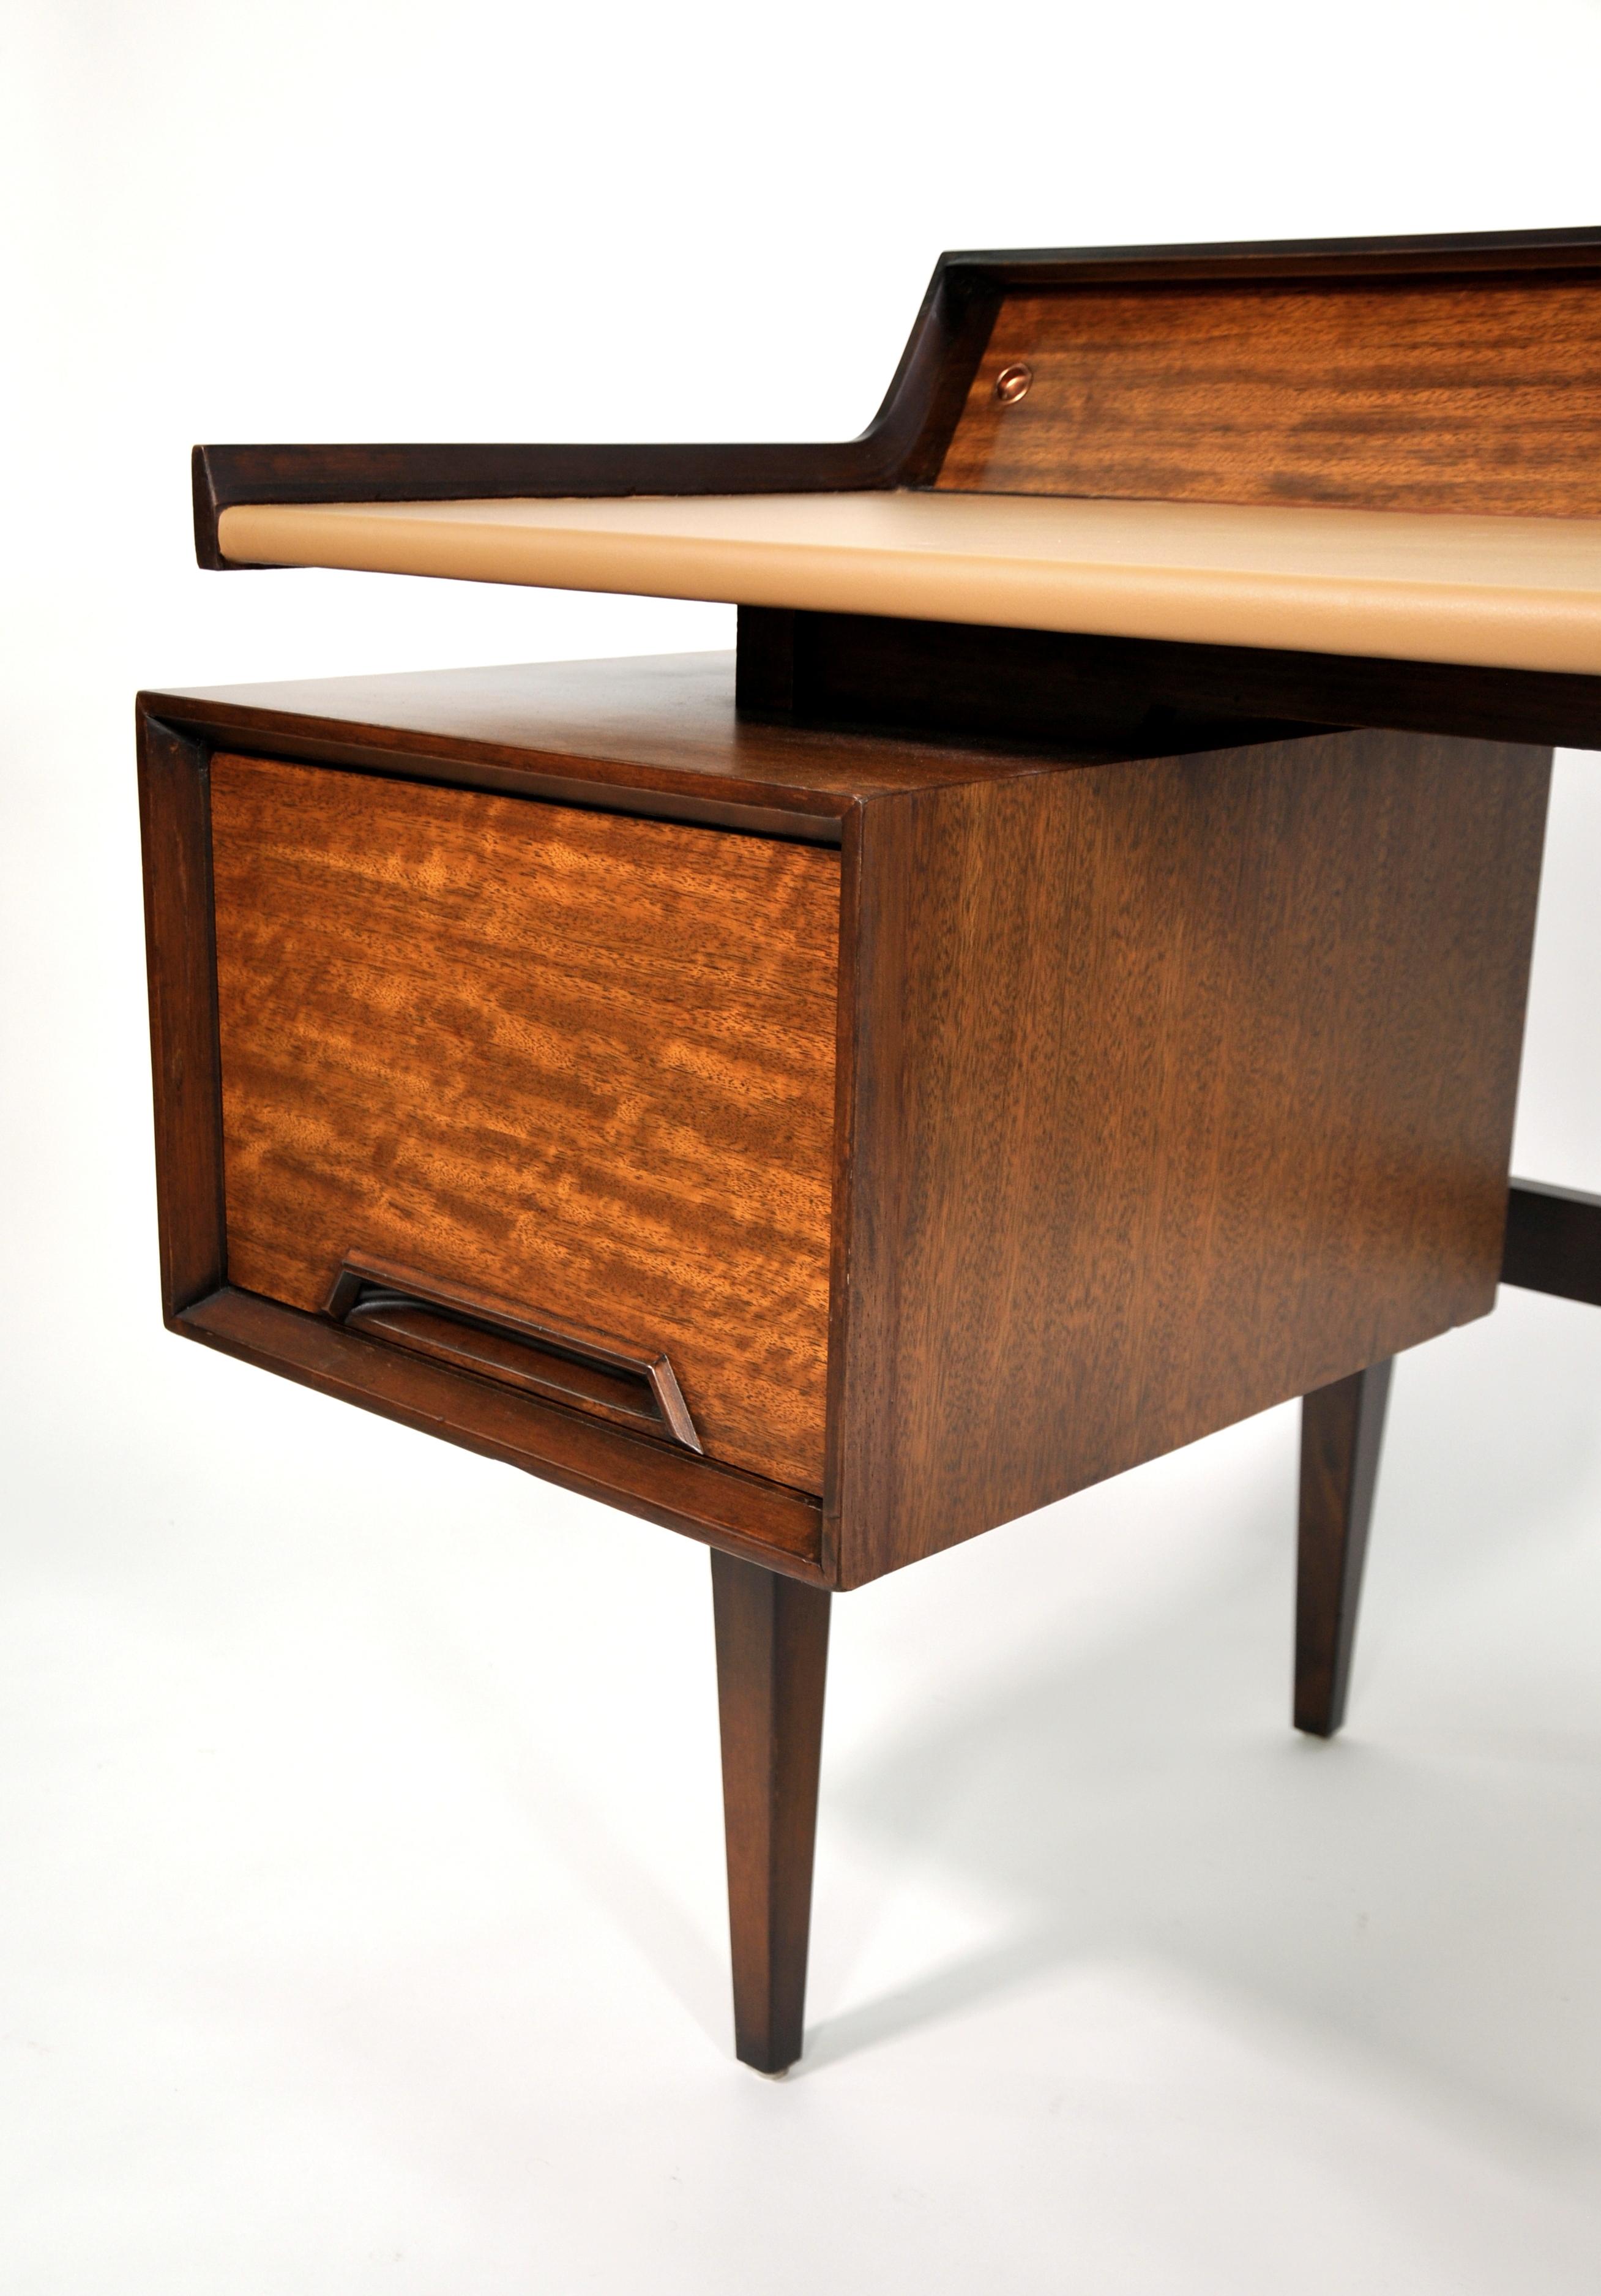 American Milo Baughman for Drexel Perspective Mindoro and Leather Desk